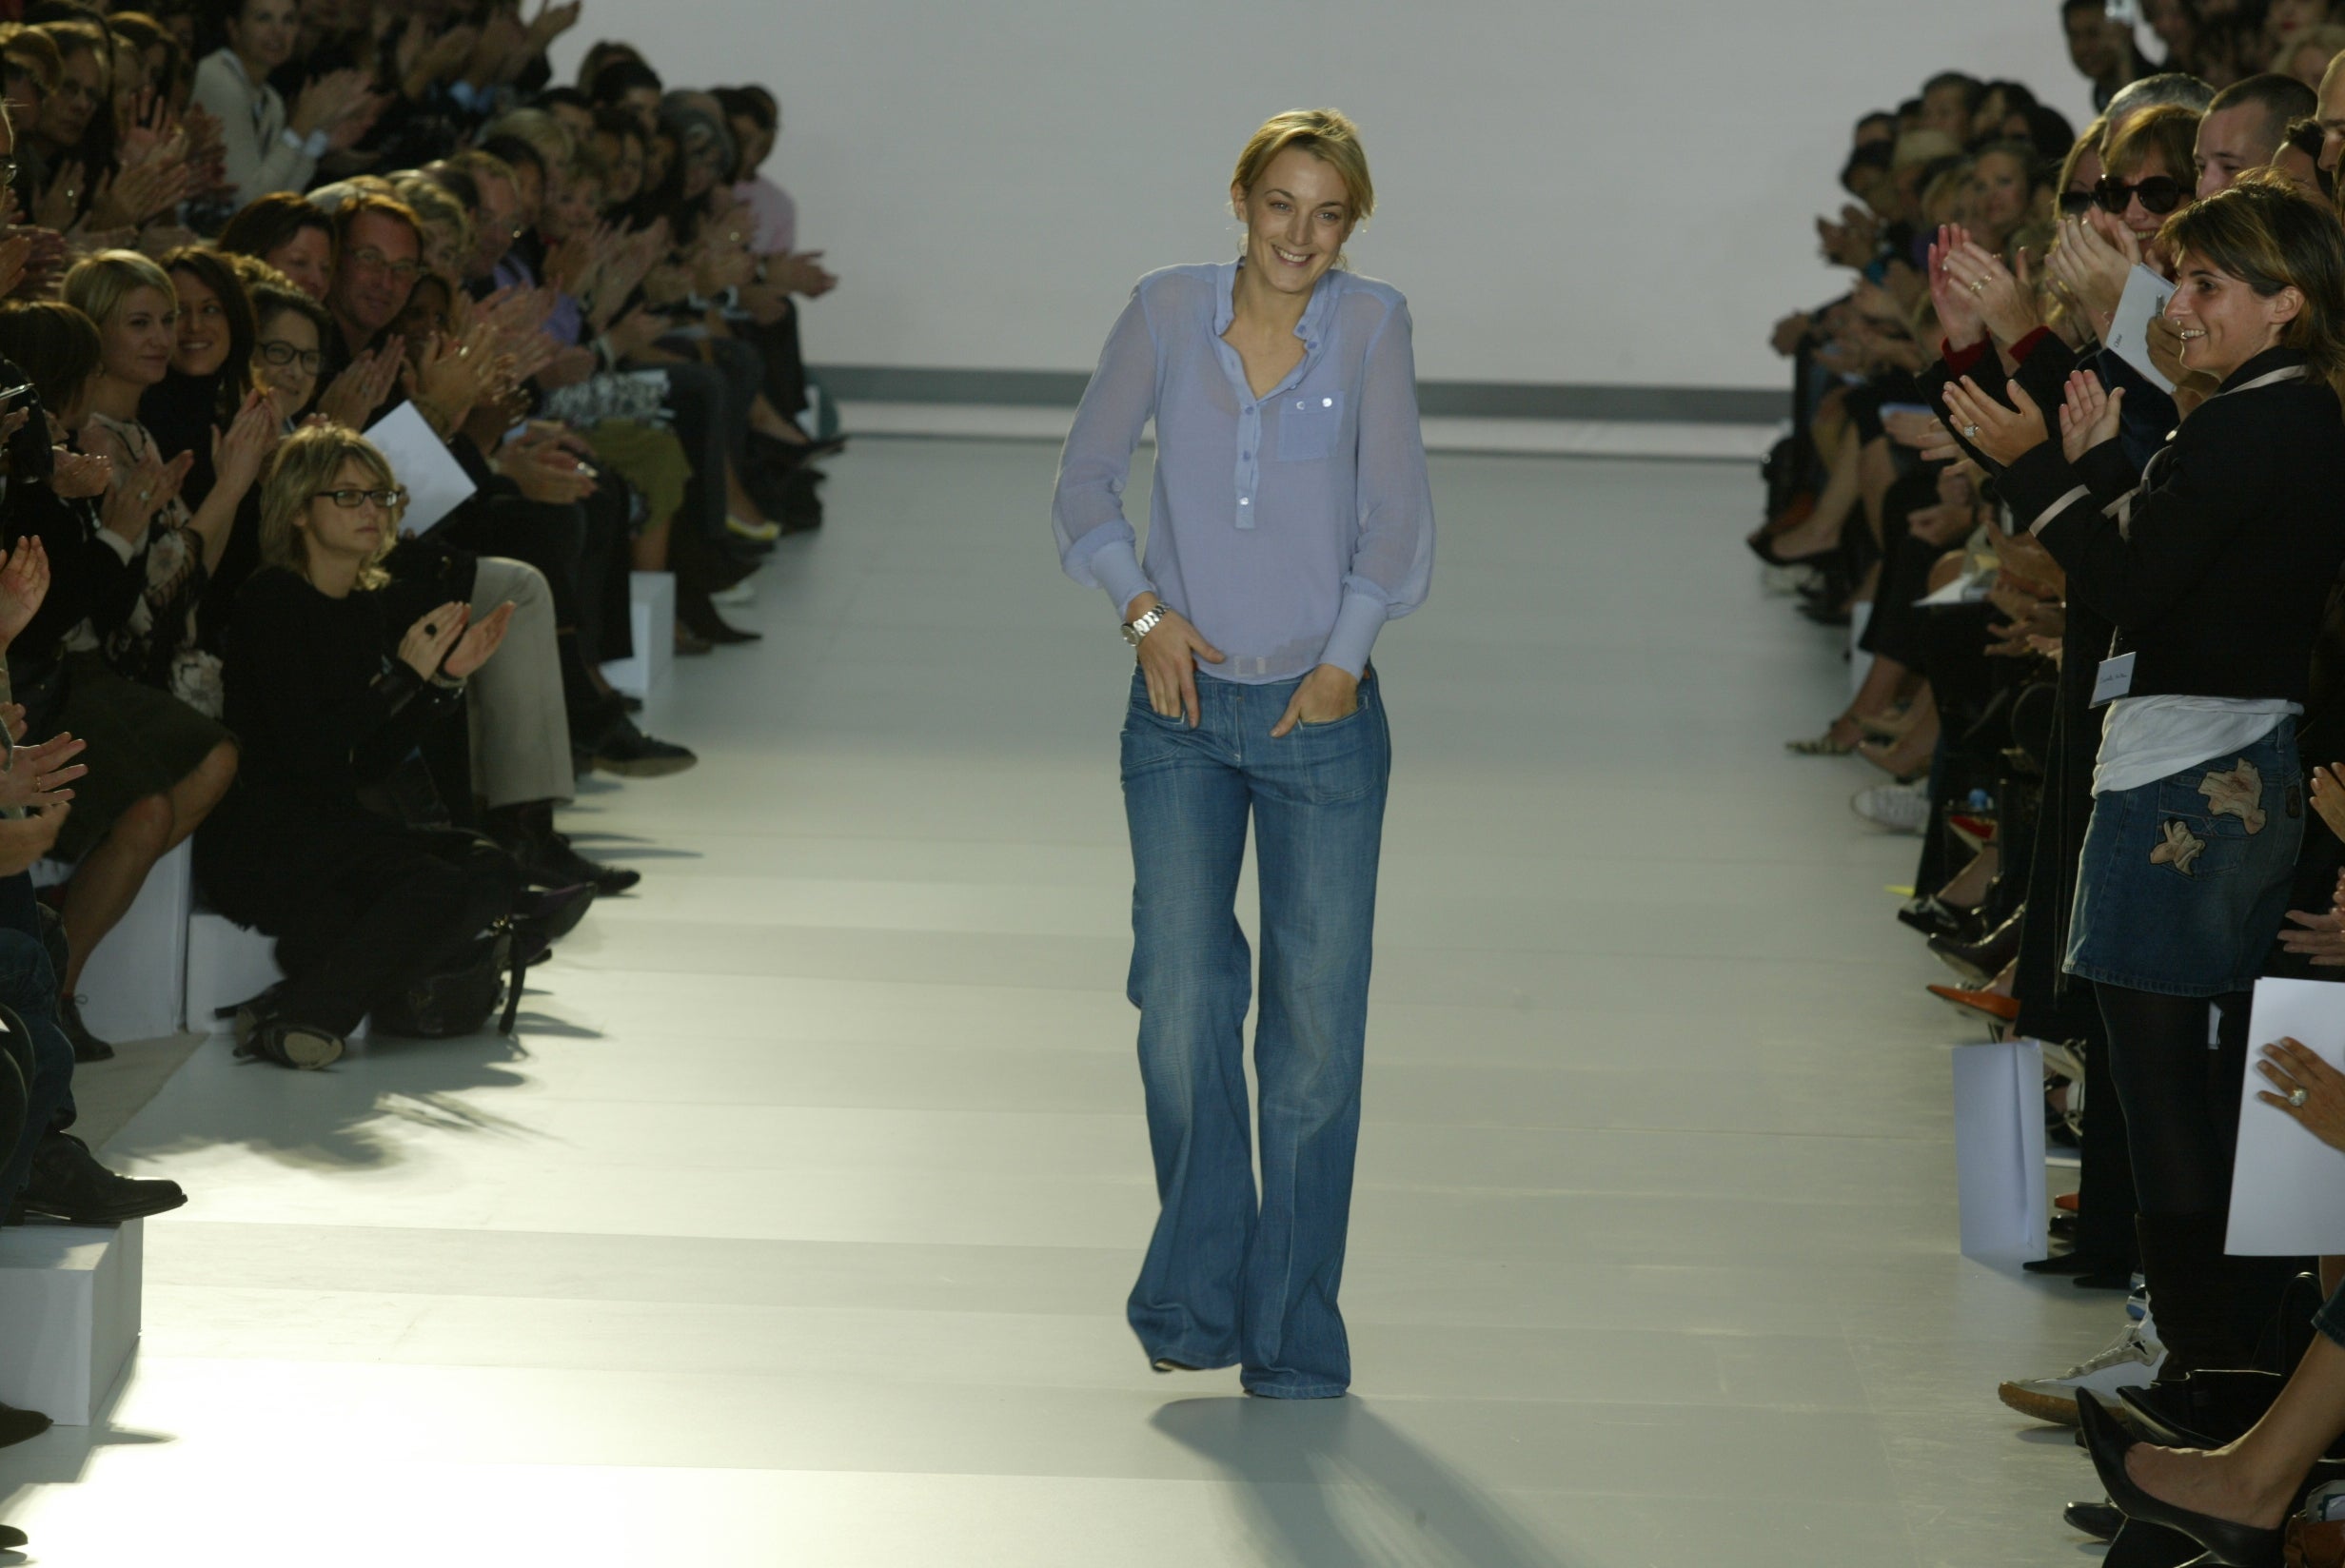 The shy designer Phoebe Philo meets her front row fans at the Spring 2004 Chloe show in Paris